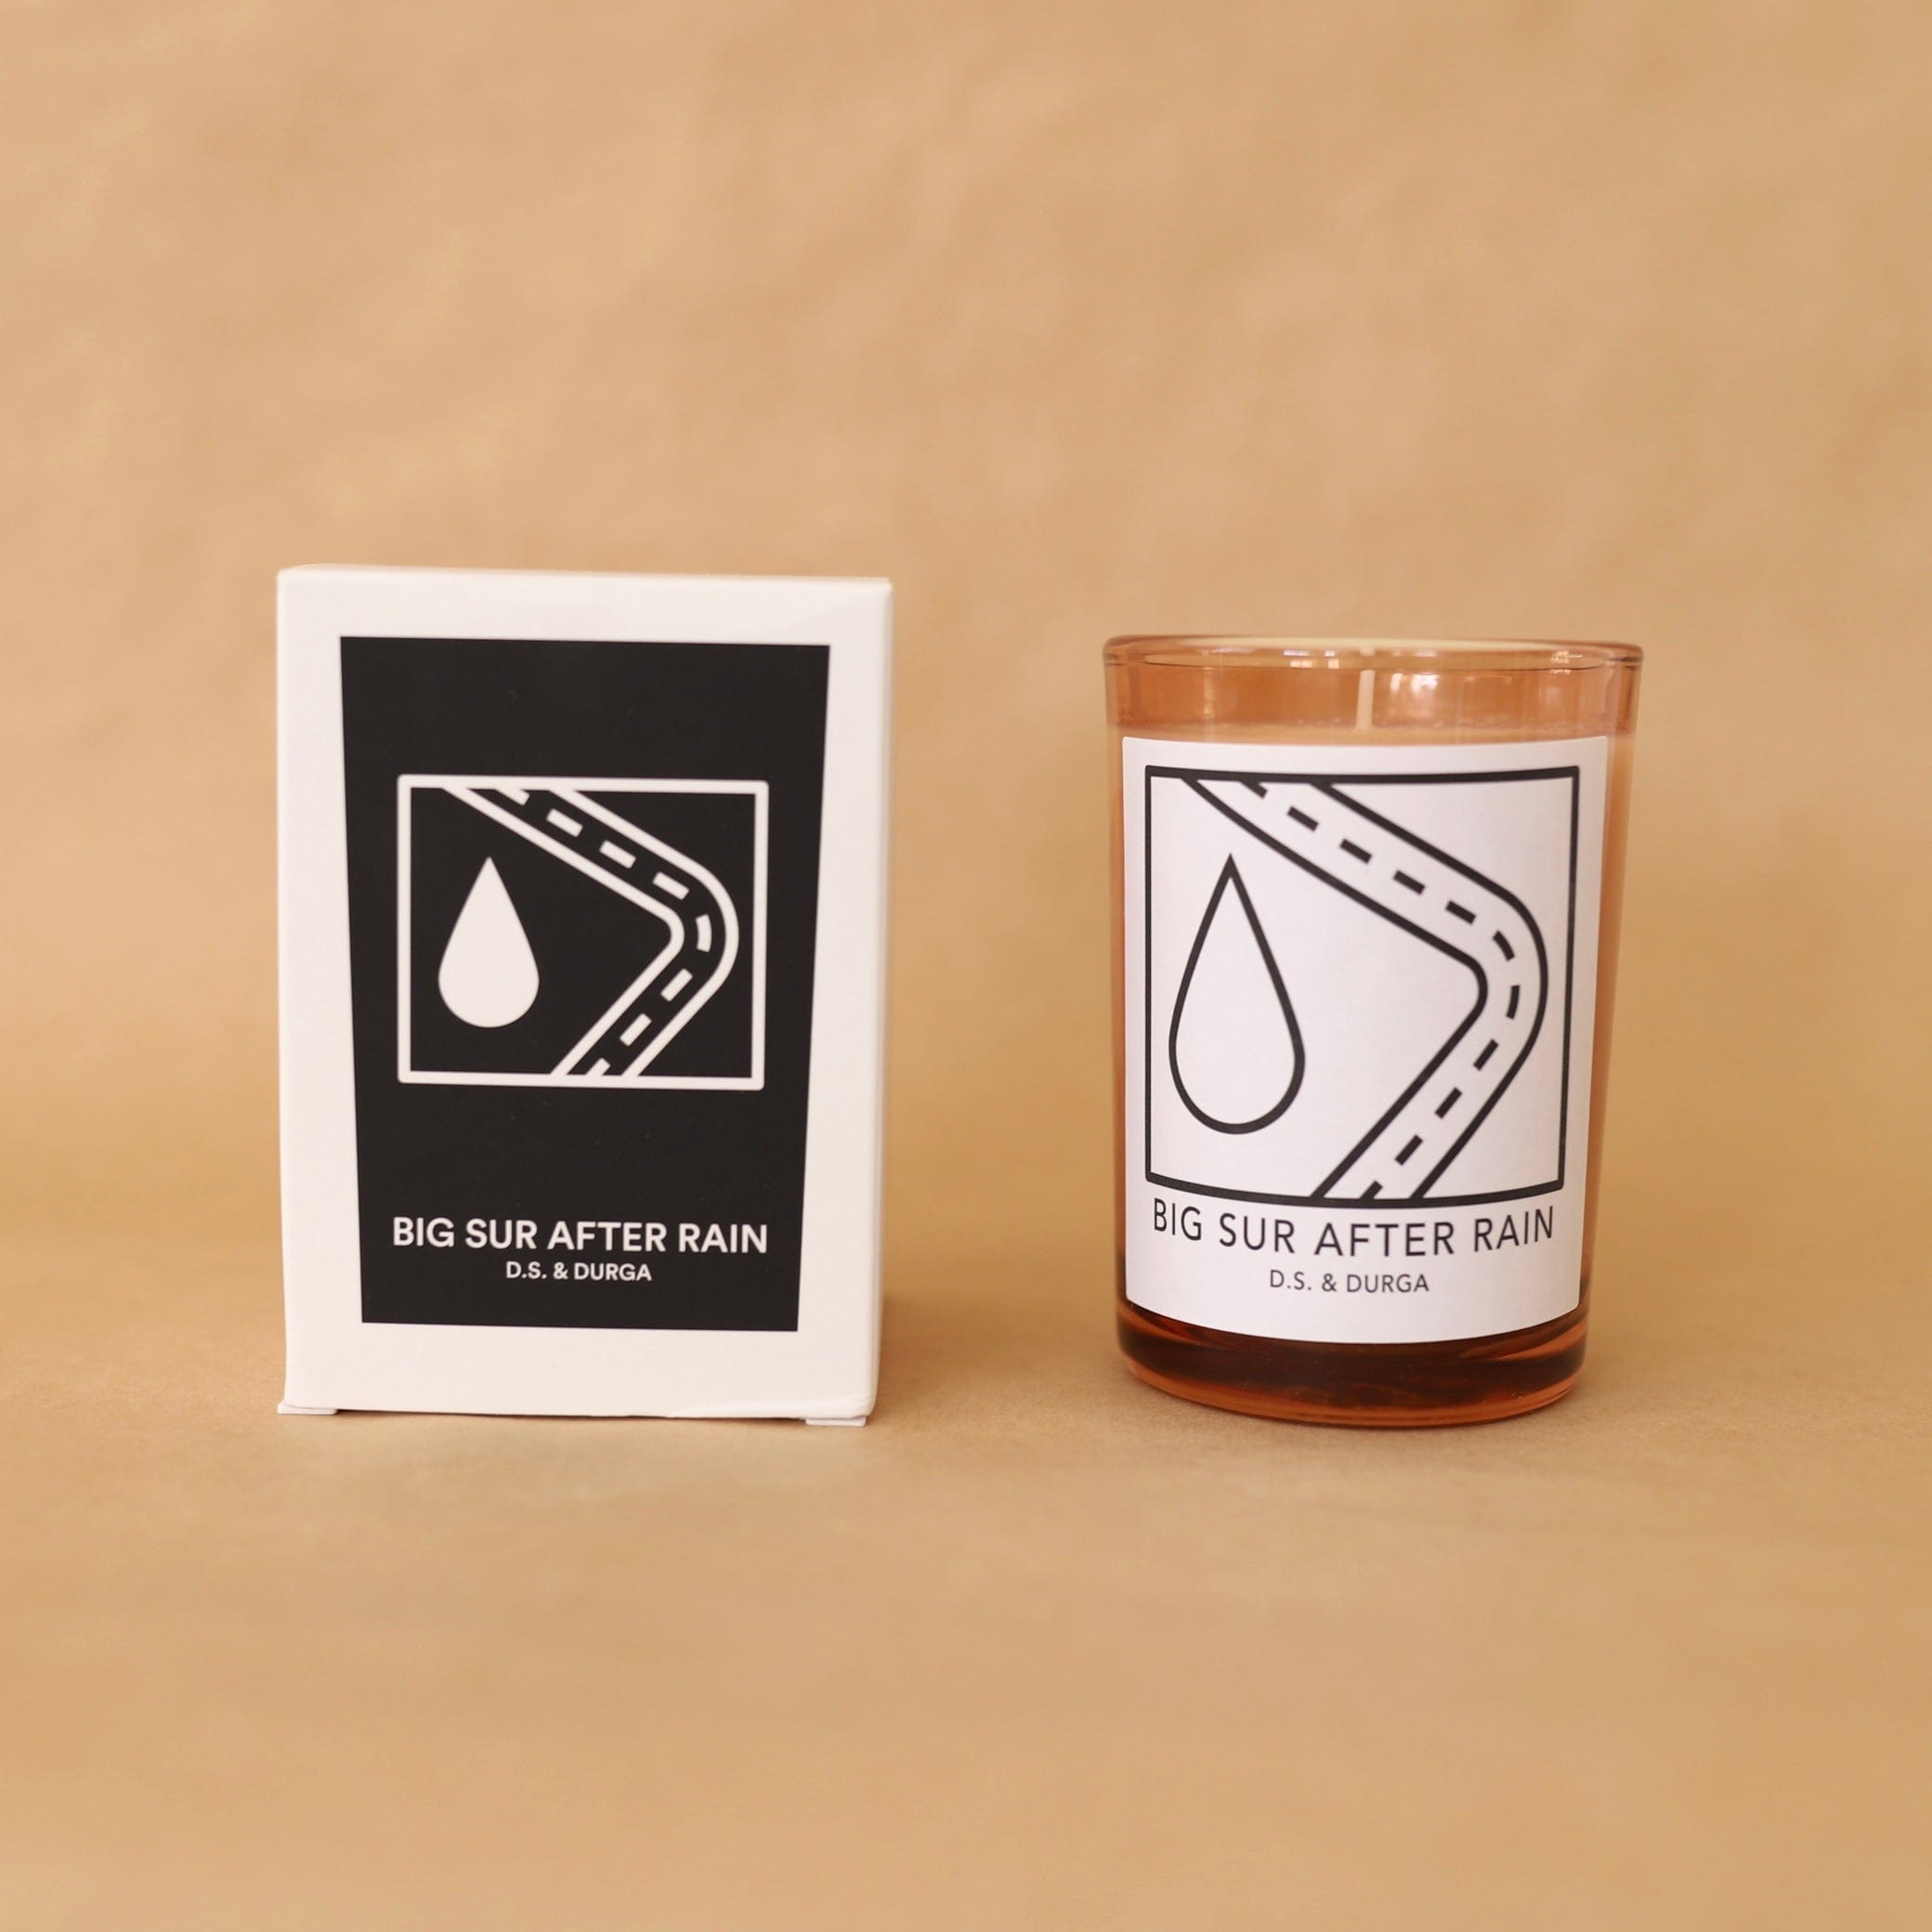 DS DURGA Apothecary Big Sur After Rain ARCHIVED -D.S. & DURGA Scented Candles